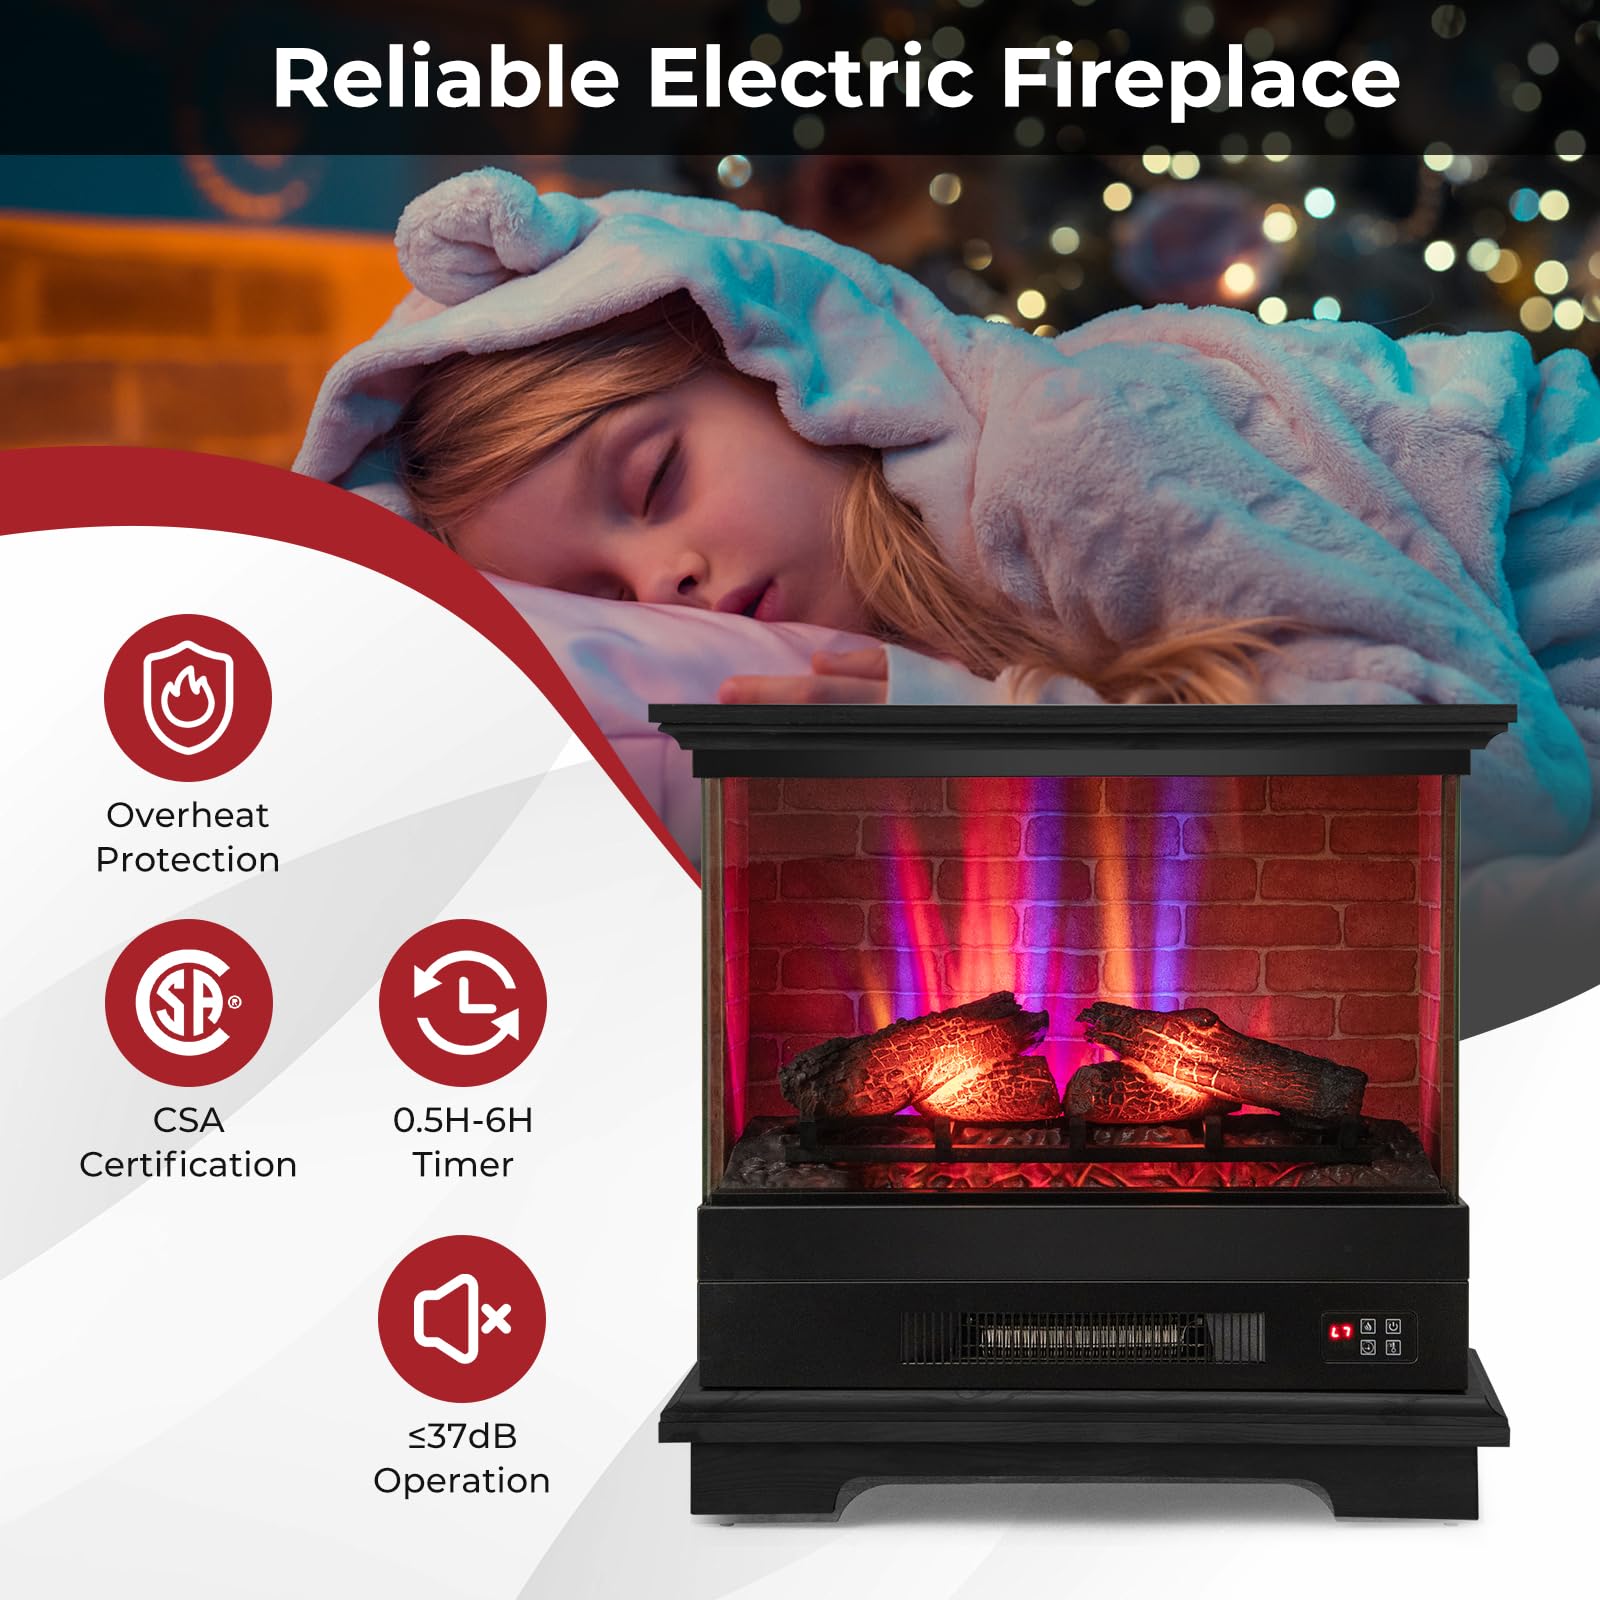 27 Inches Electric Fireplace Heater, Black - Tangkula